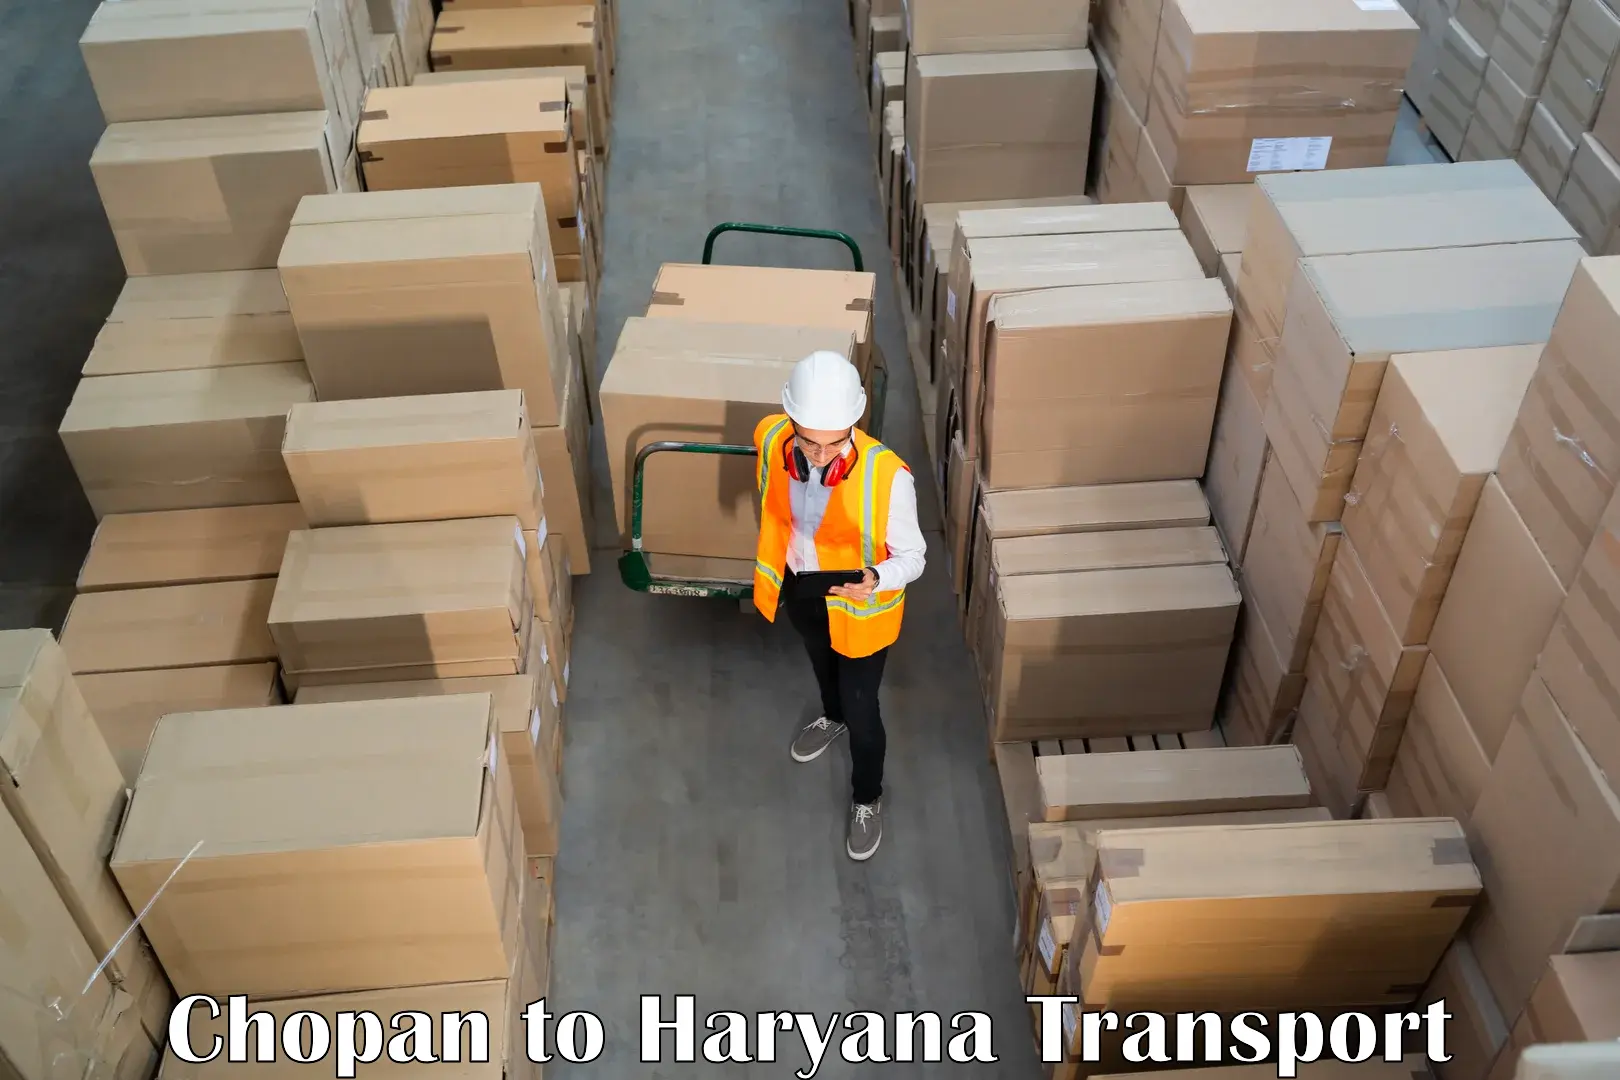 Container transport service Chopan to Sohna